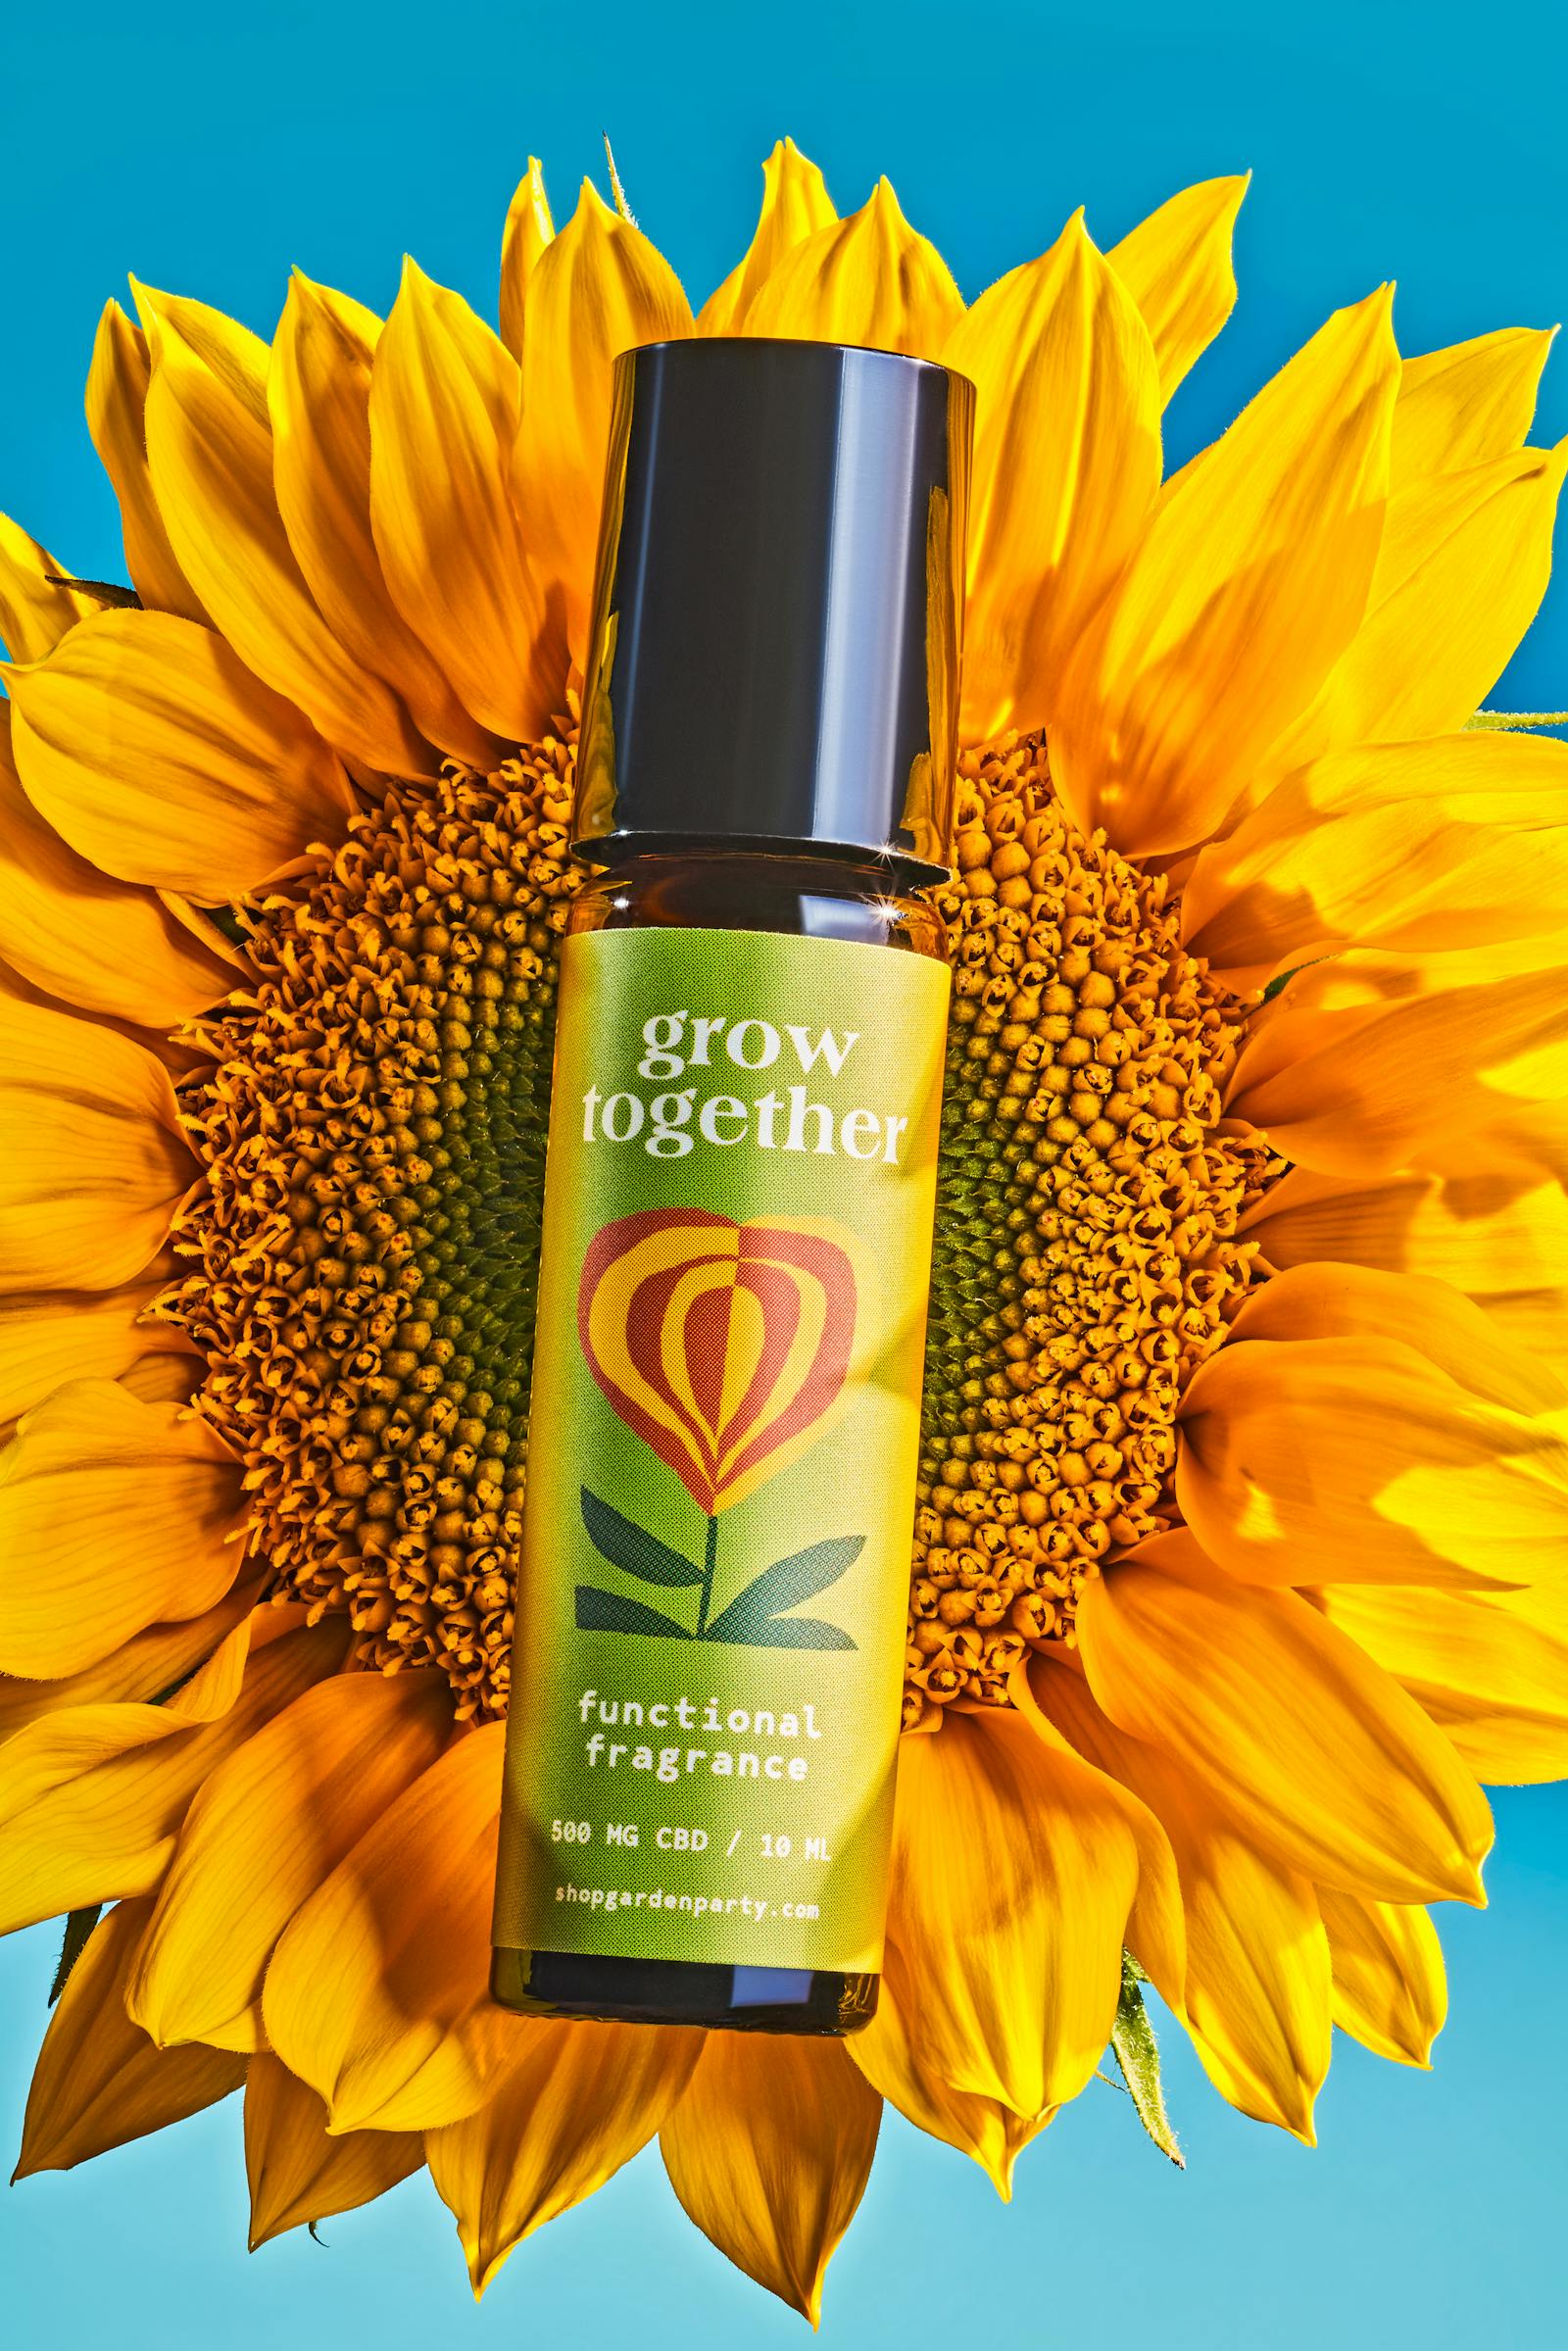 Grow Together - a functional fragrance 